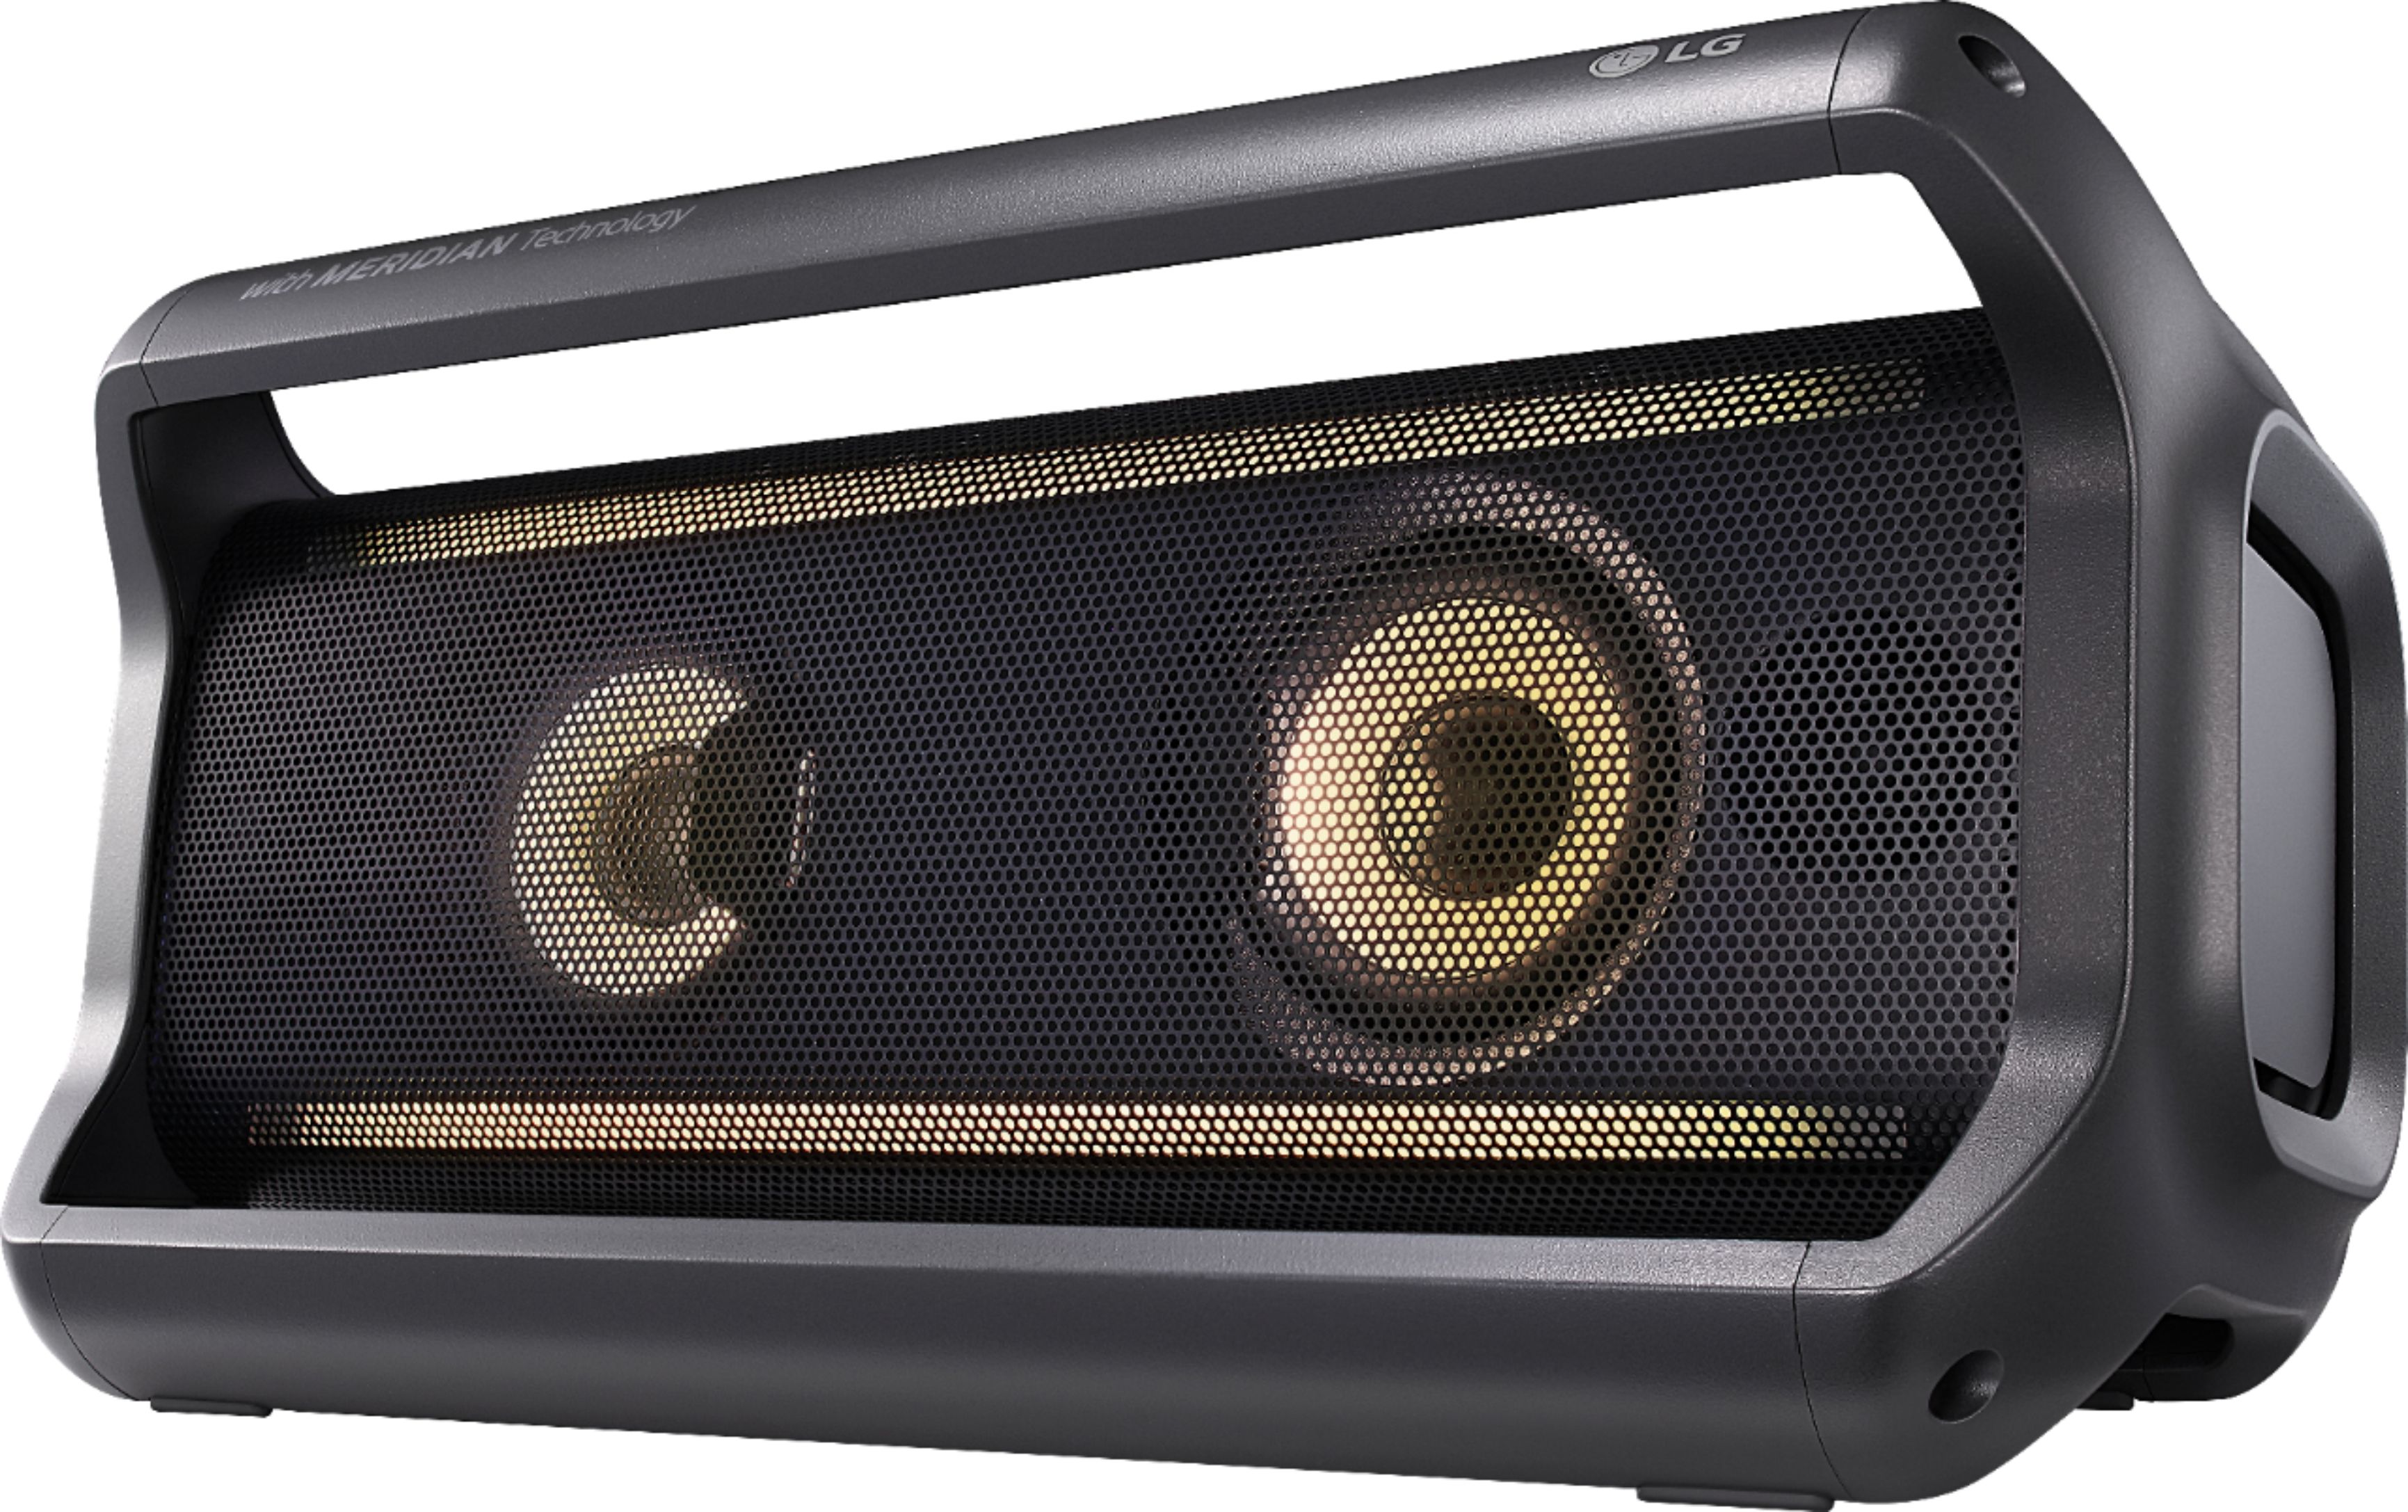 LG Xboom Go PK7 Is a Portable Speaker With Great Sound